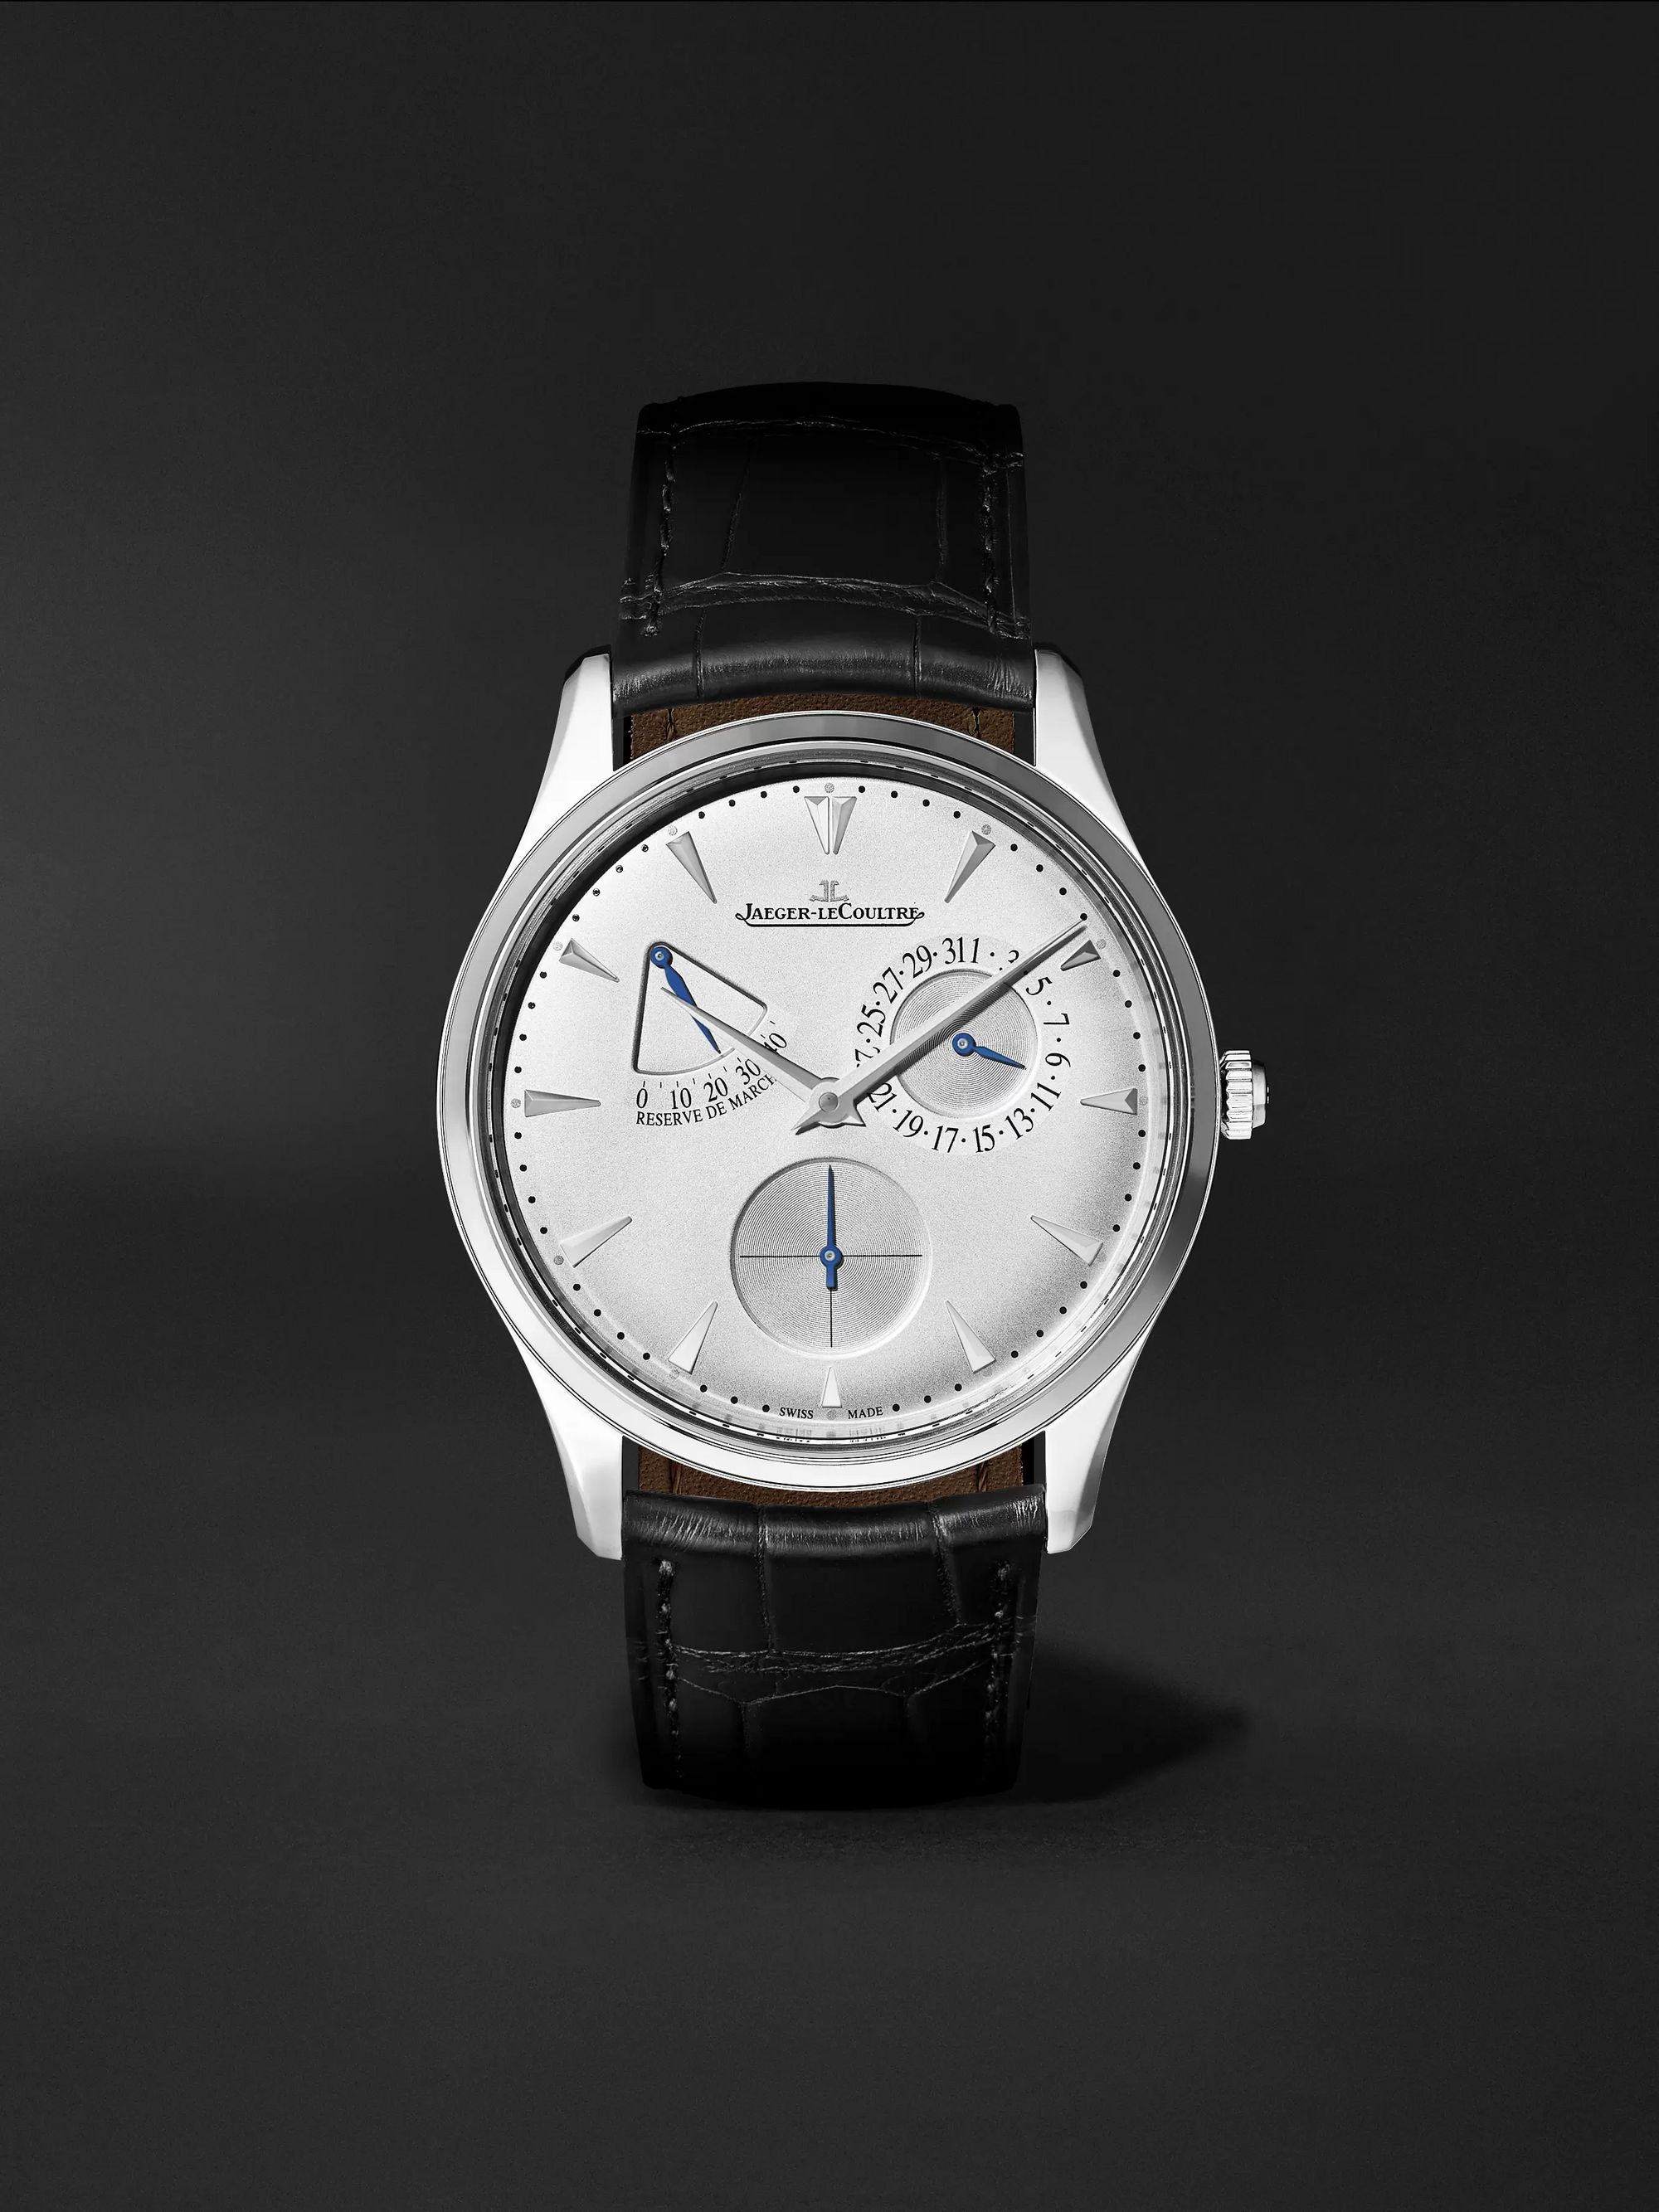 JAEGER-LECOULTRE Master Ultra Thin Réserve De Marche Automatic 39mm Stainless Steel and Alligator Watch, Ref No. Q1378420